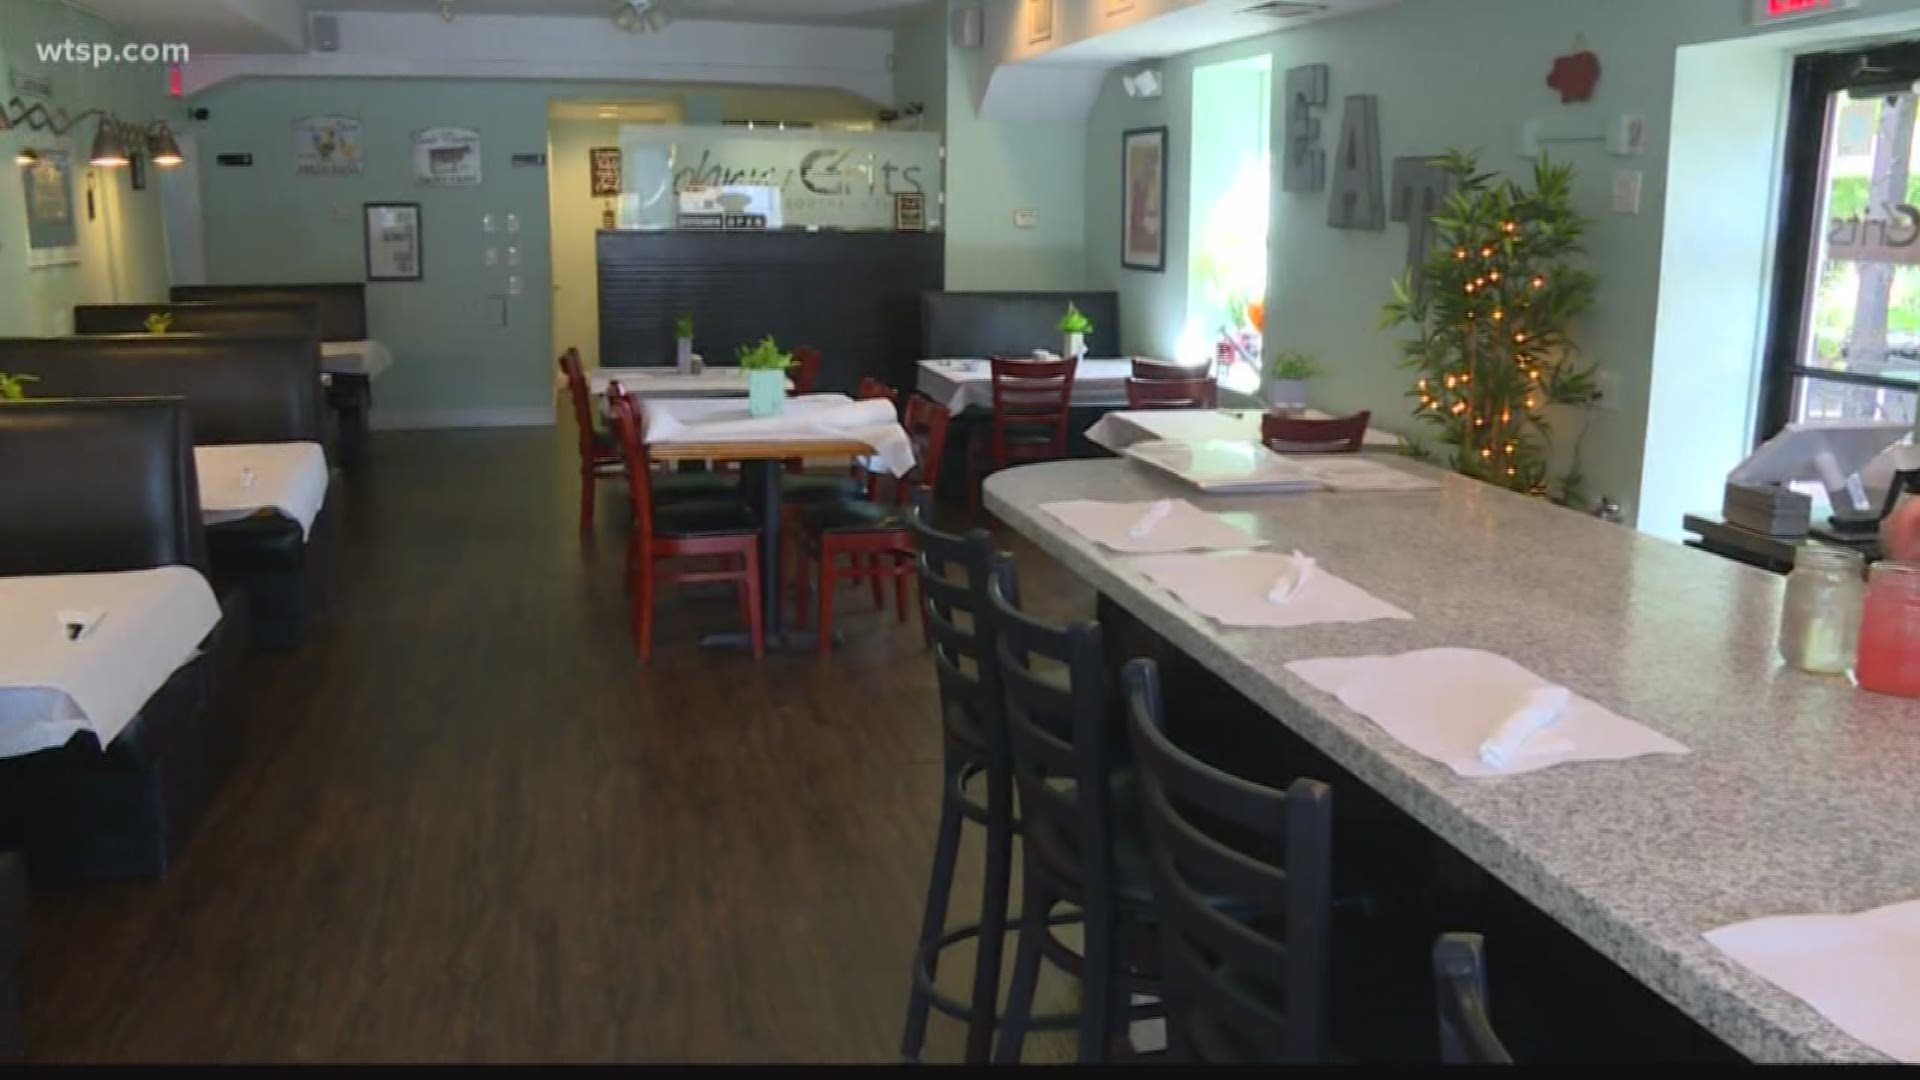 Johnny Grits in New Port Richey was temporarily shut down by health inspectors last week with 47 violations.